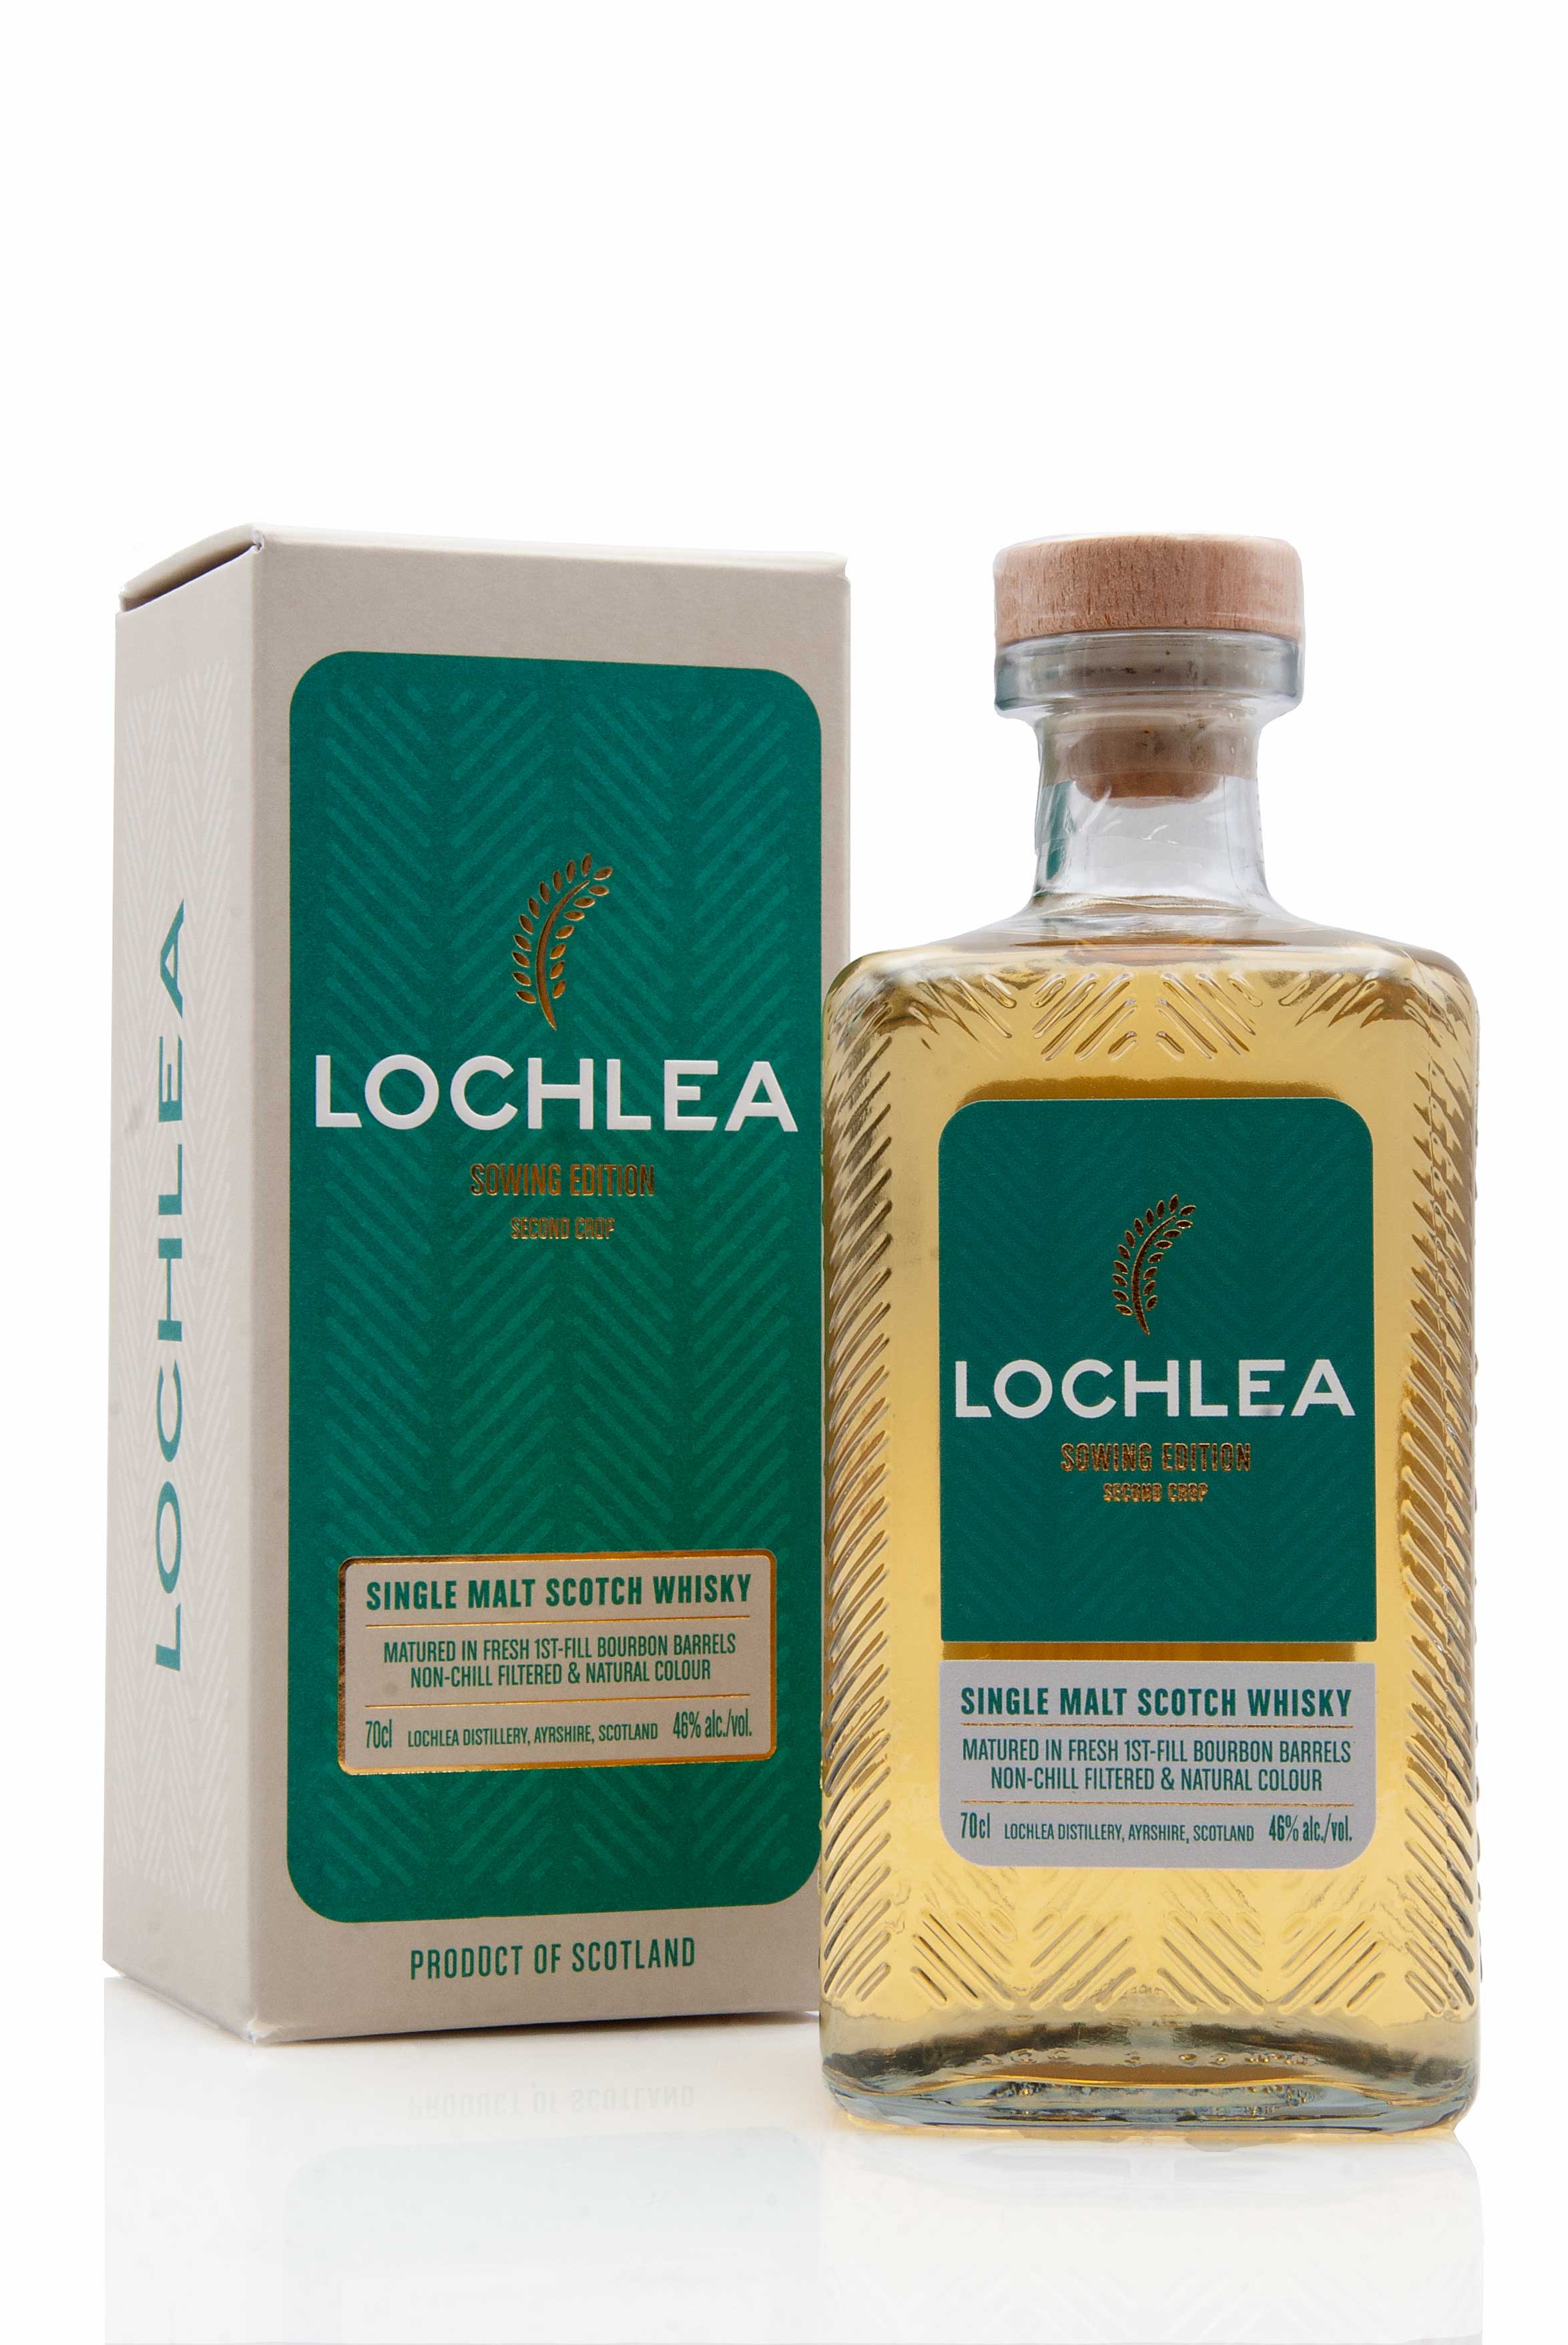 Lochlea Sowing Edition Second Crop | Lowland Whisky | Abbey Whisky